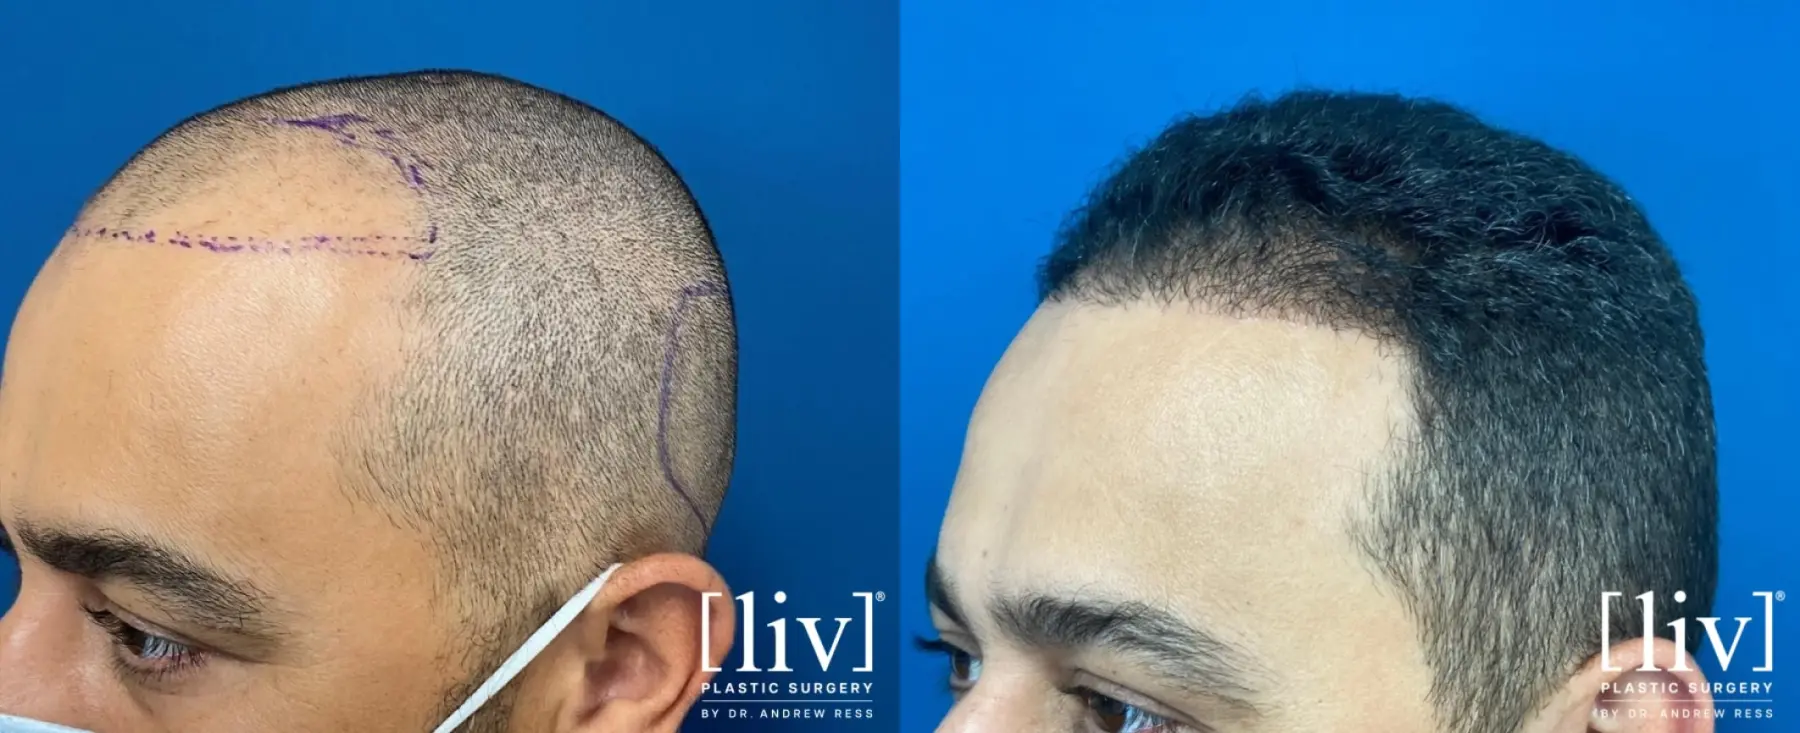 FUE Hair Transplant - Before and After 2